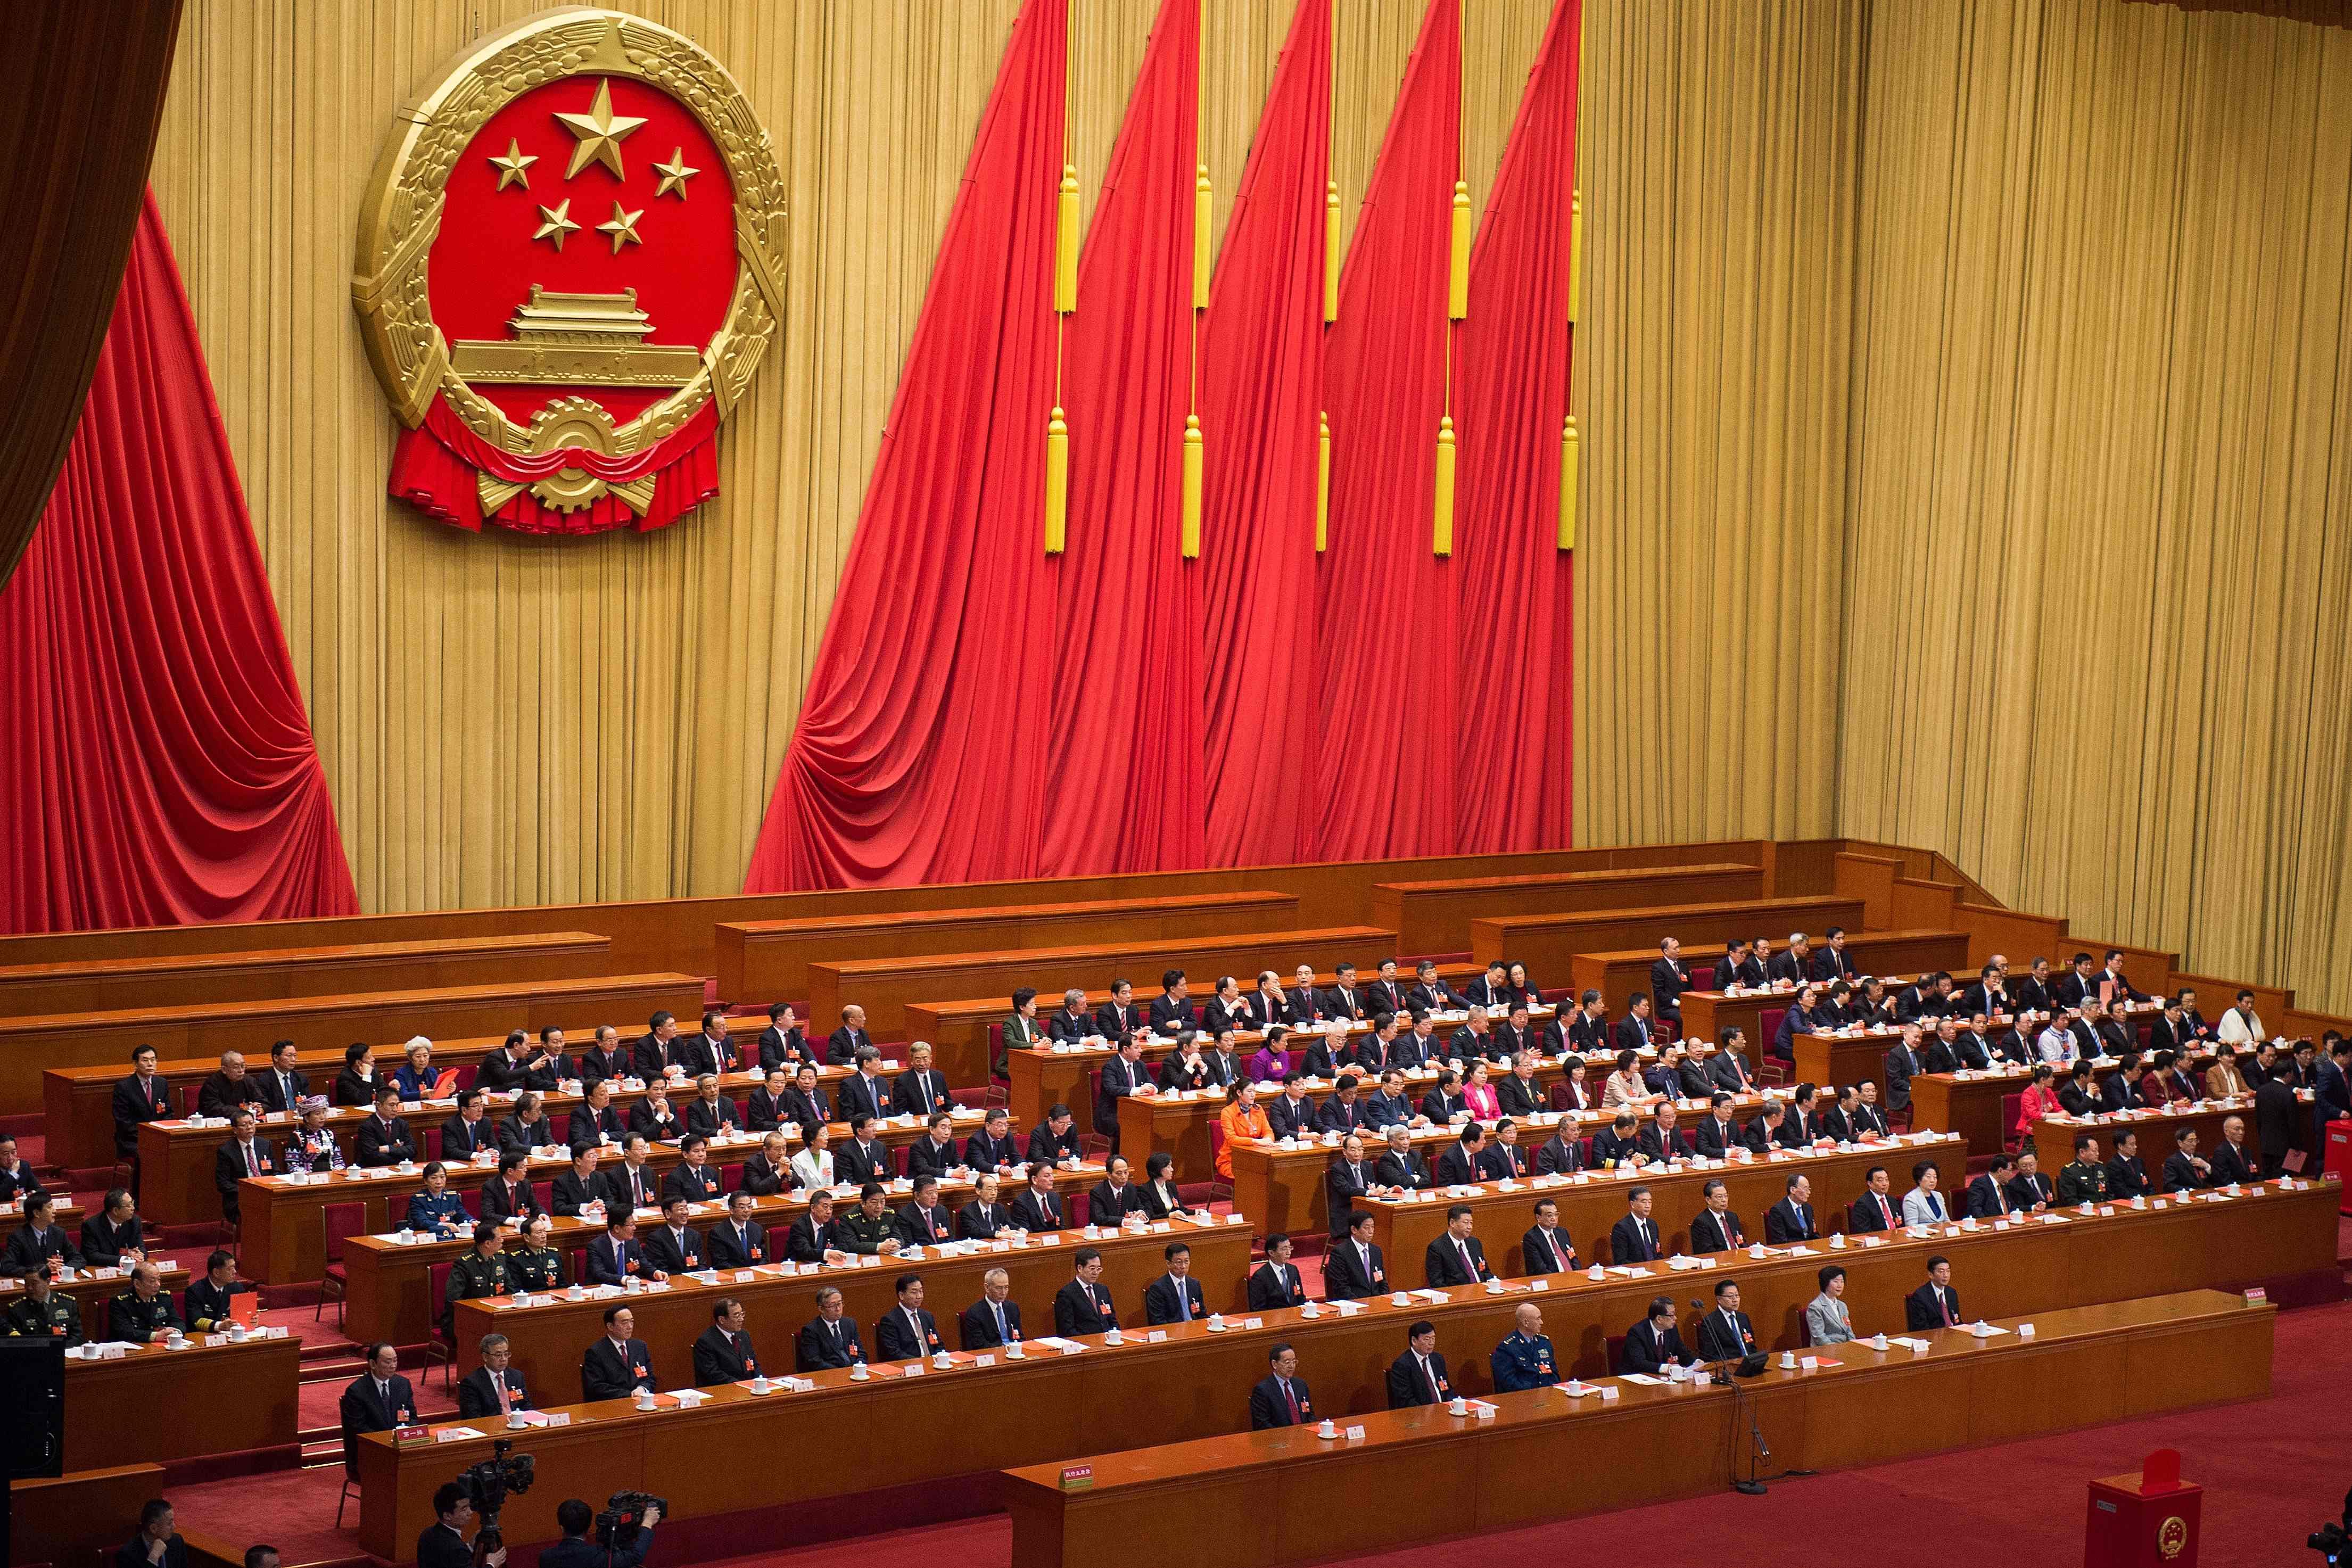 This file photo shows a general view of the fifth plenary session of the first session of the 13th National People's Congress (NPC) at the Great Hall of the People in Beijing, March 17, 2018. (AFP photo)